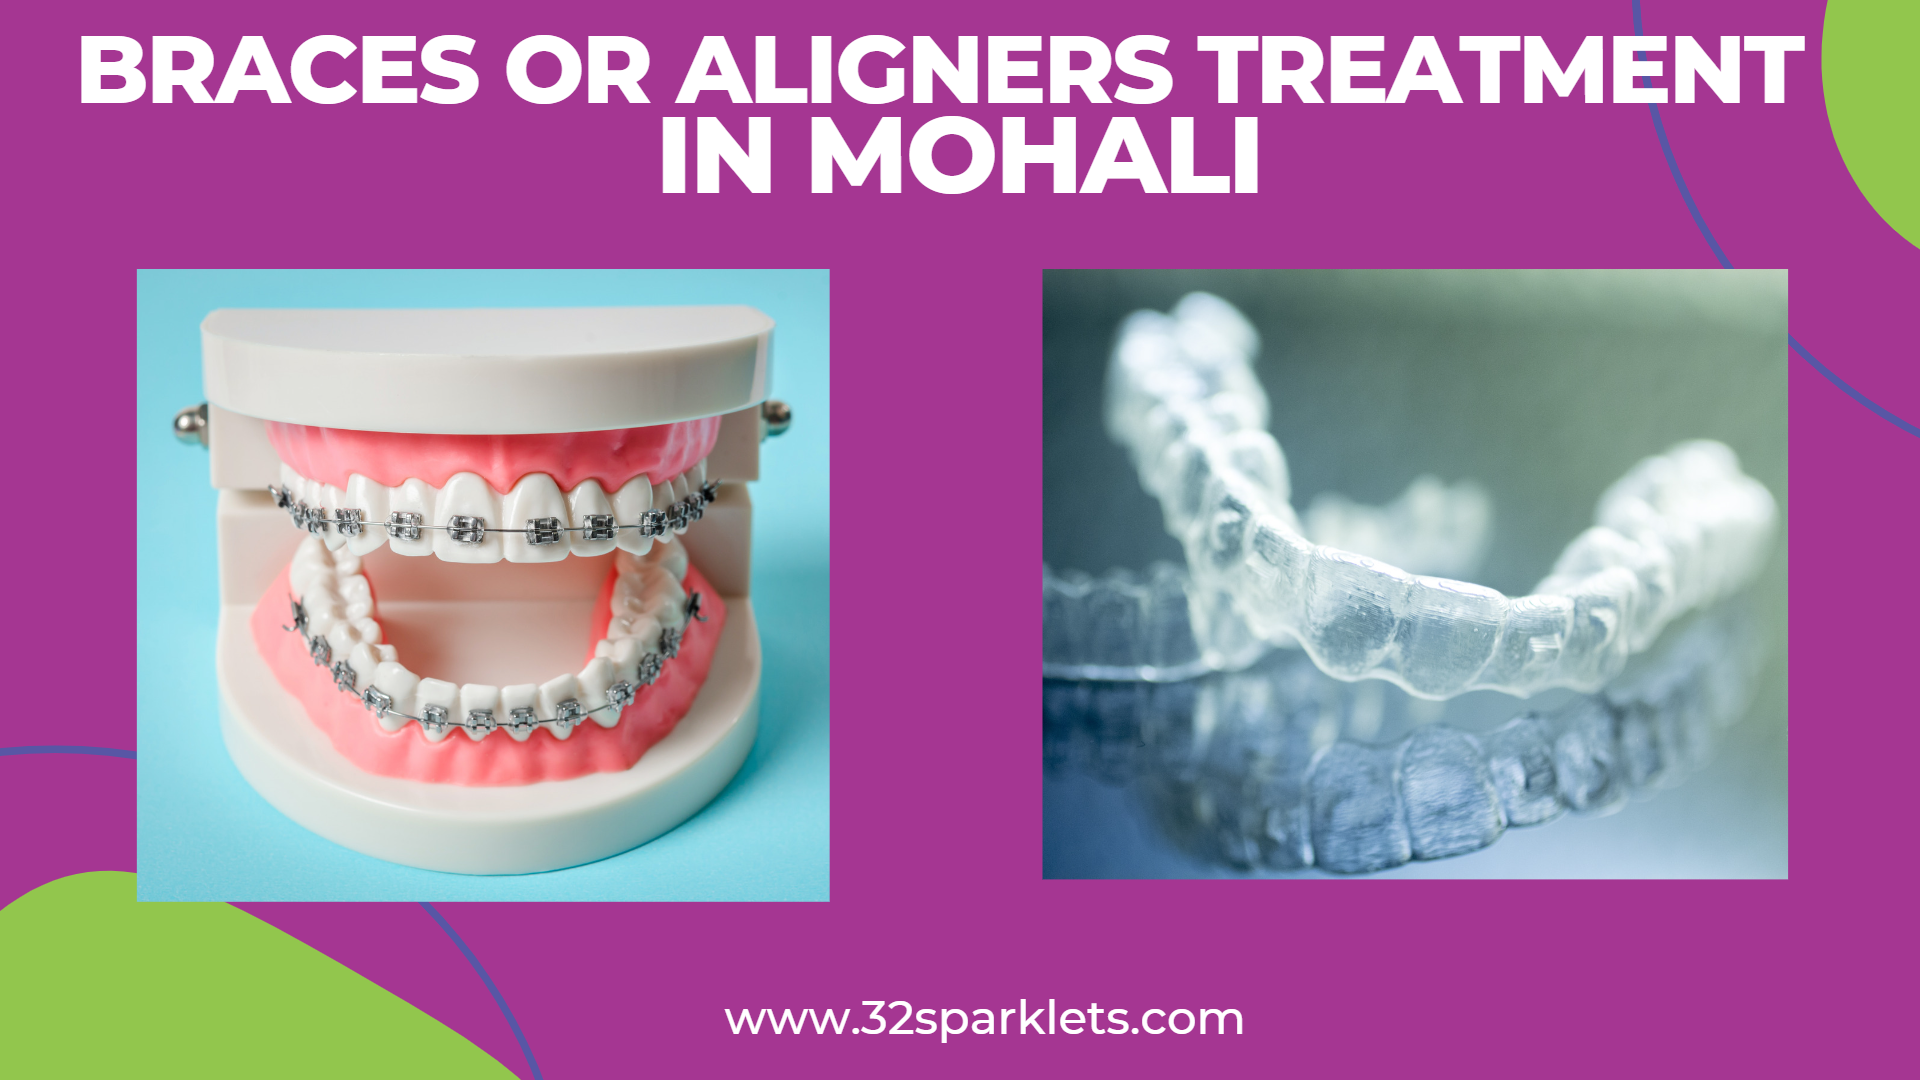 braces and aligners in Mohali, aligner treatment, braces treatment